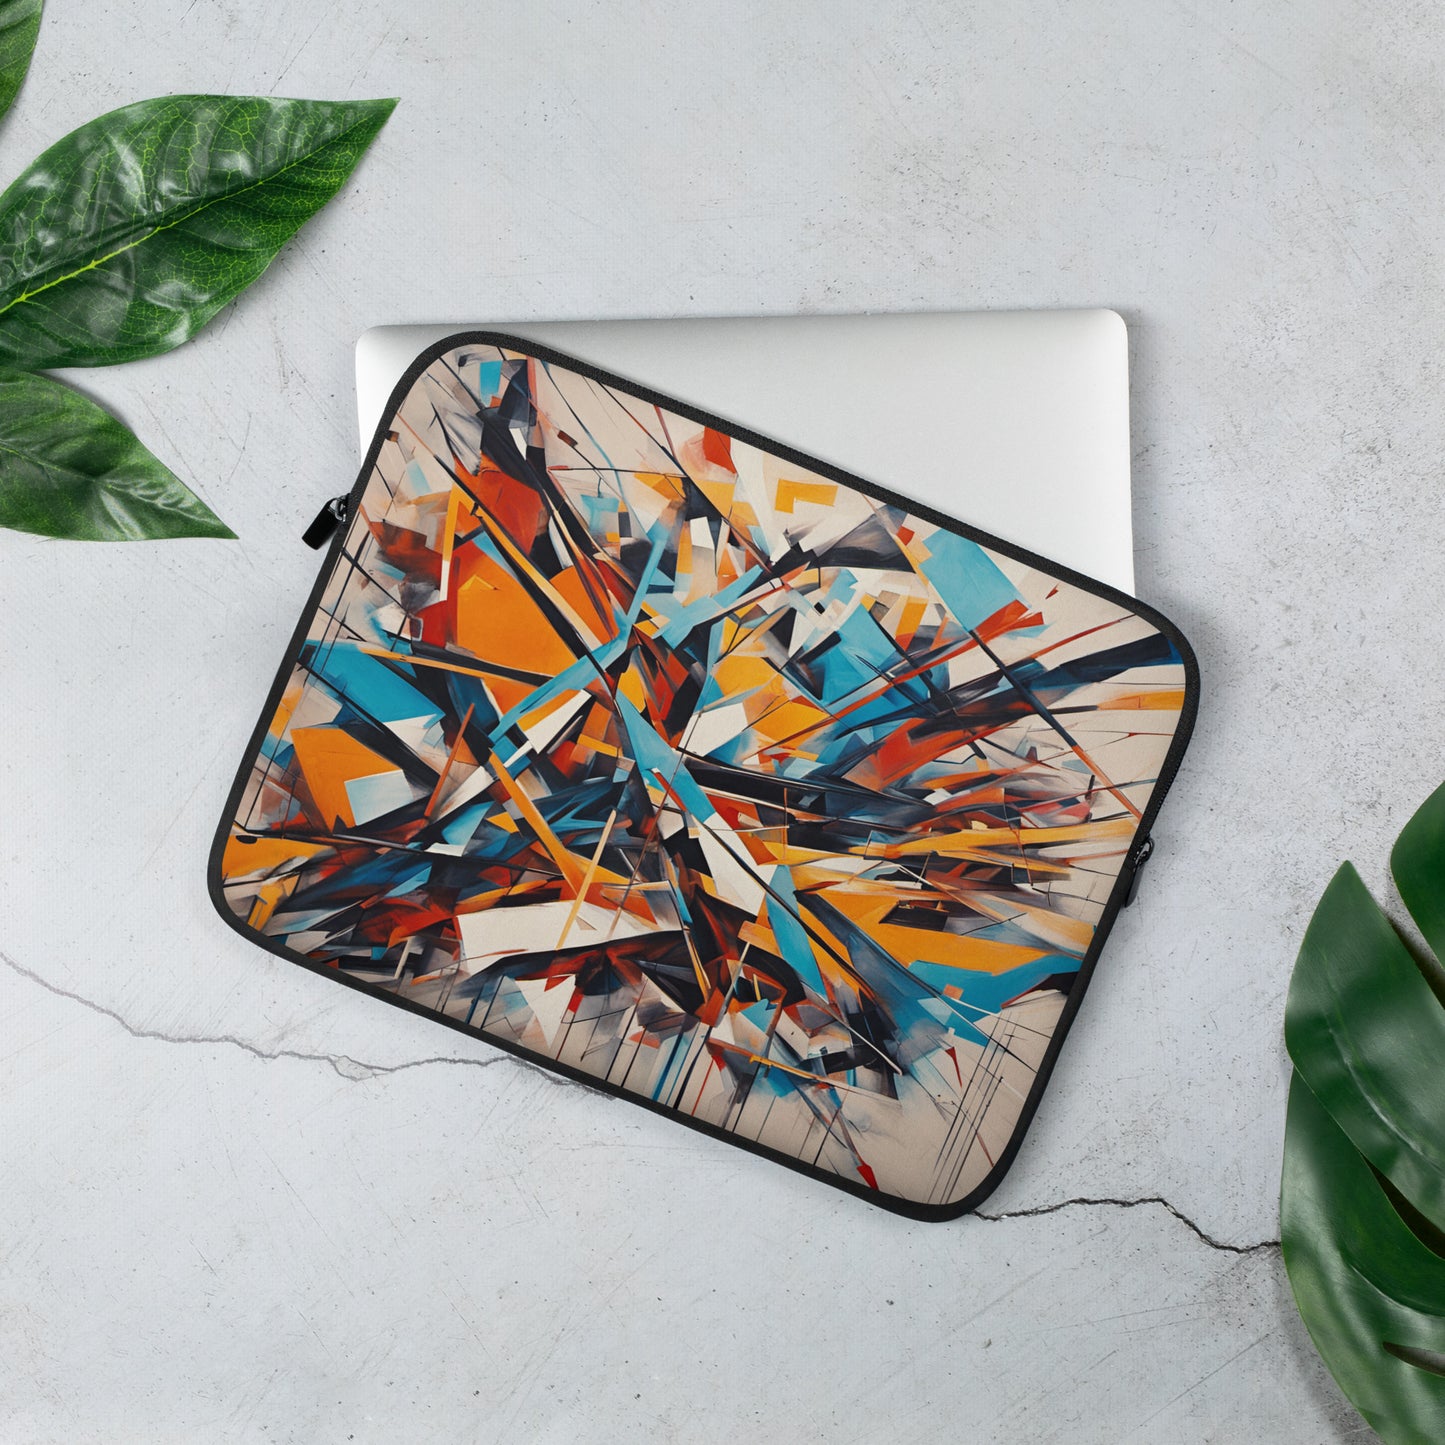 Techie and Computer Gifts, Modern Art Explosion Print on Laptop sleeve 13 inches